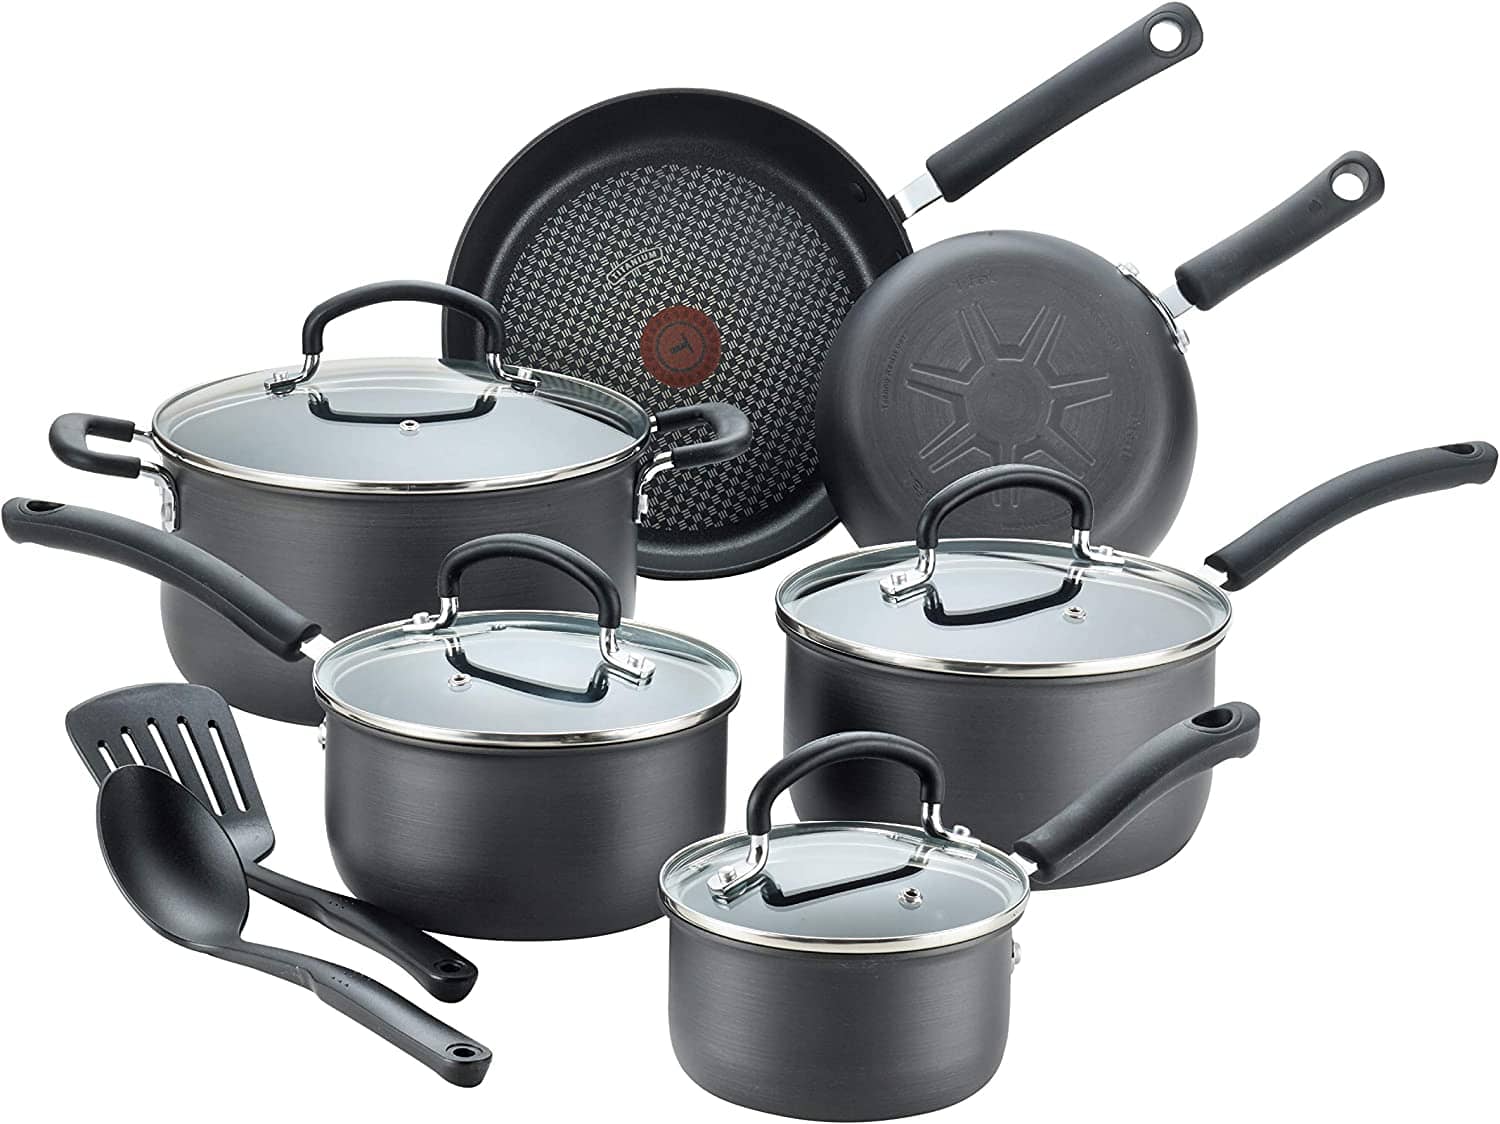 T-fal Ultimate Hard Anodized Cookware Set